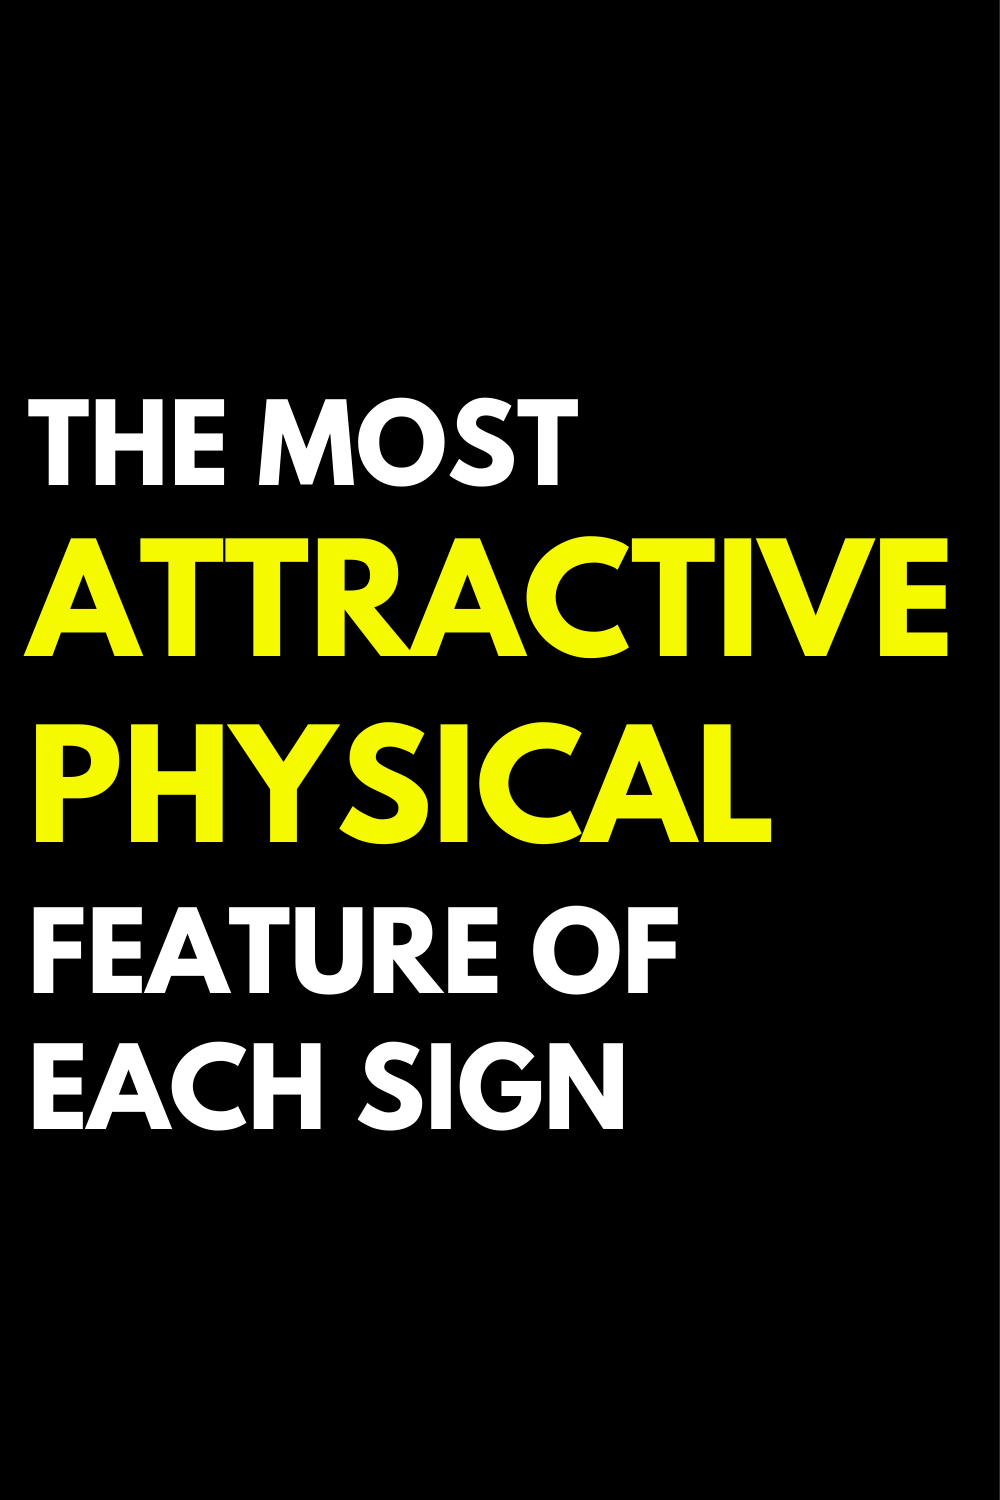 The most attractive physical feature of each sign